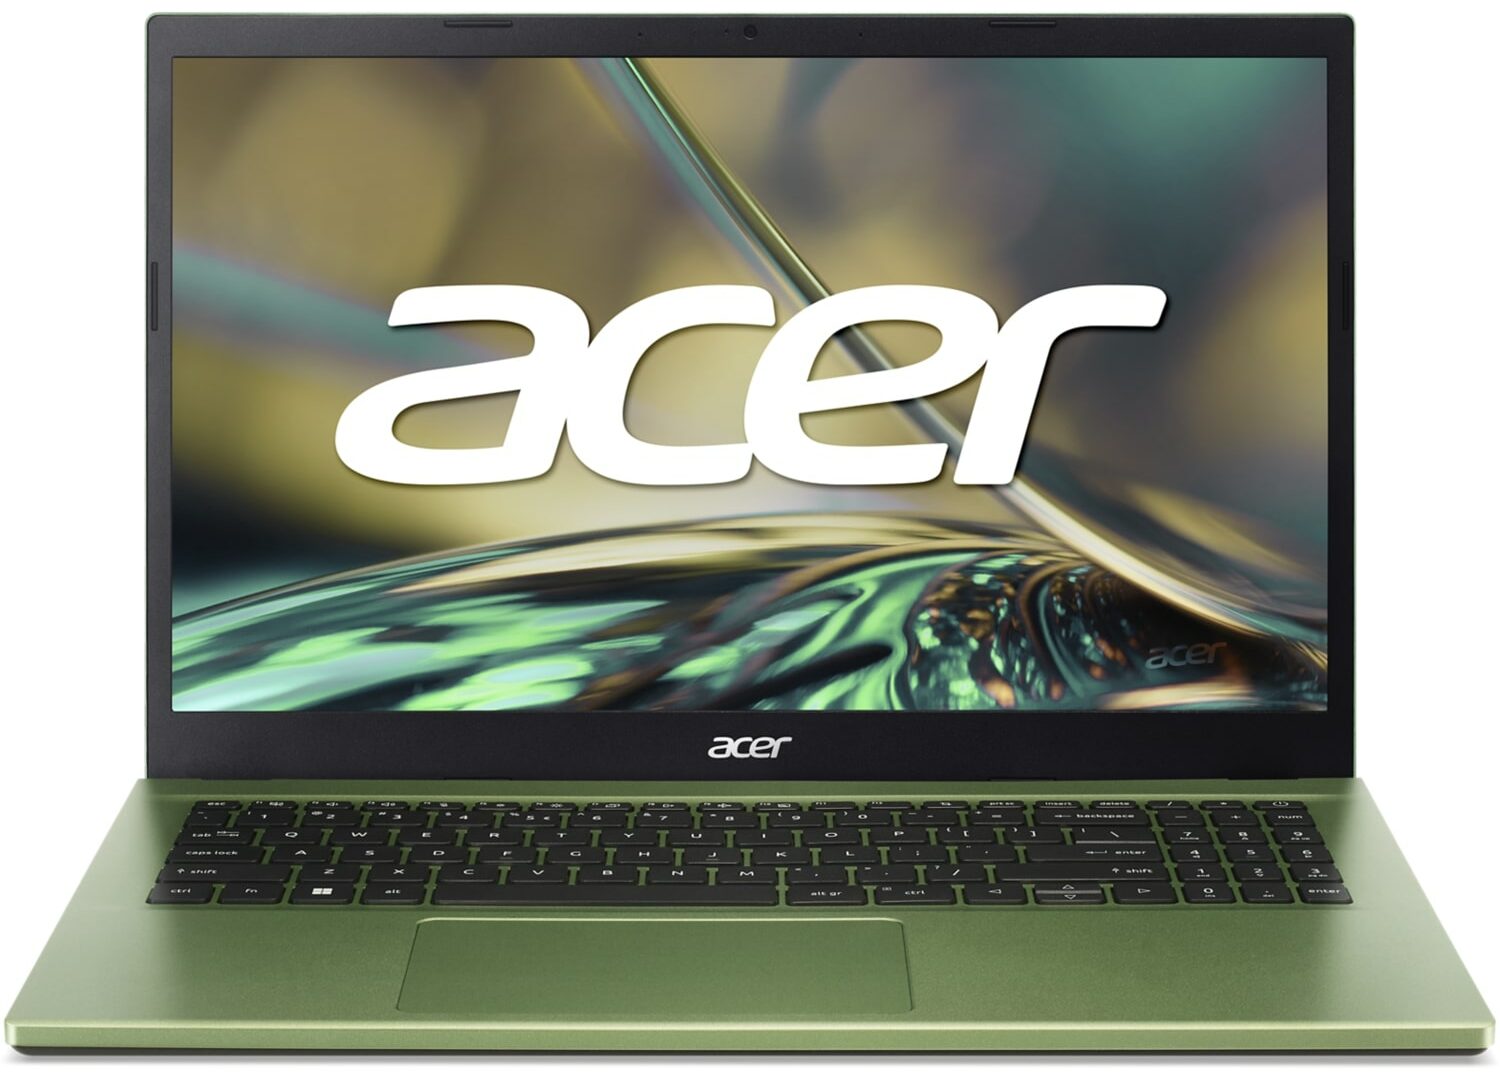 Acer Aspire 3 (A315-59 / A315-59G) - Specs, Tests, and Prices